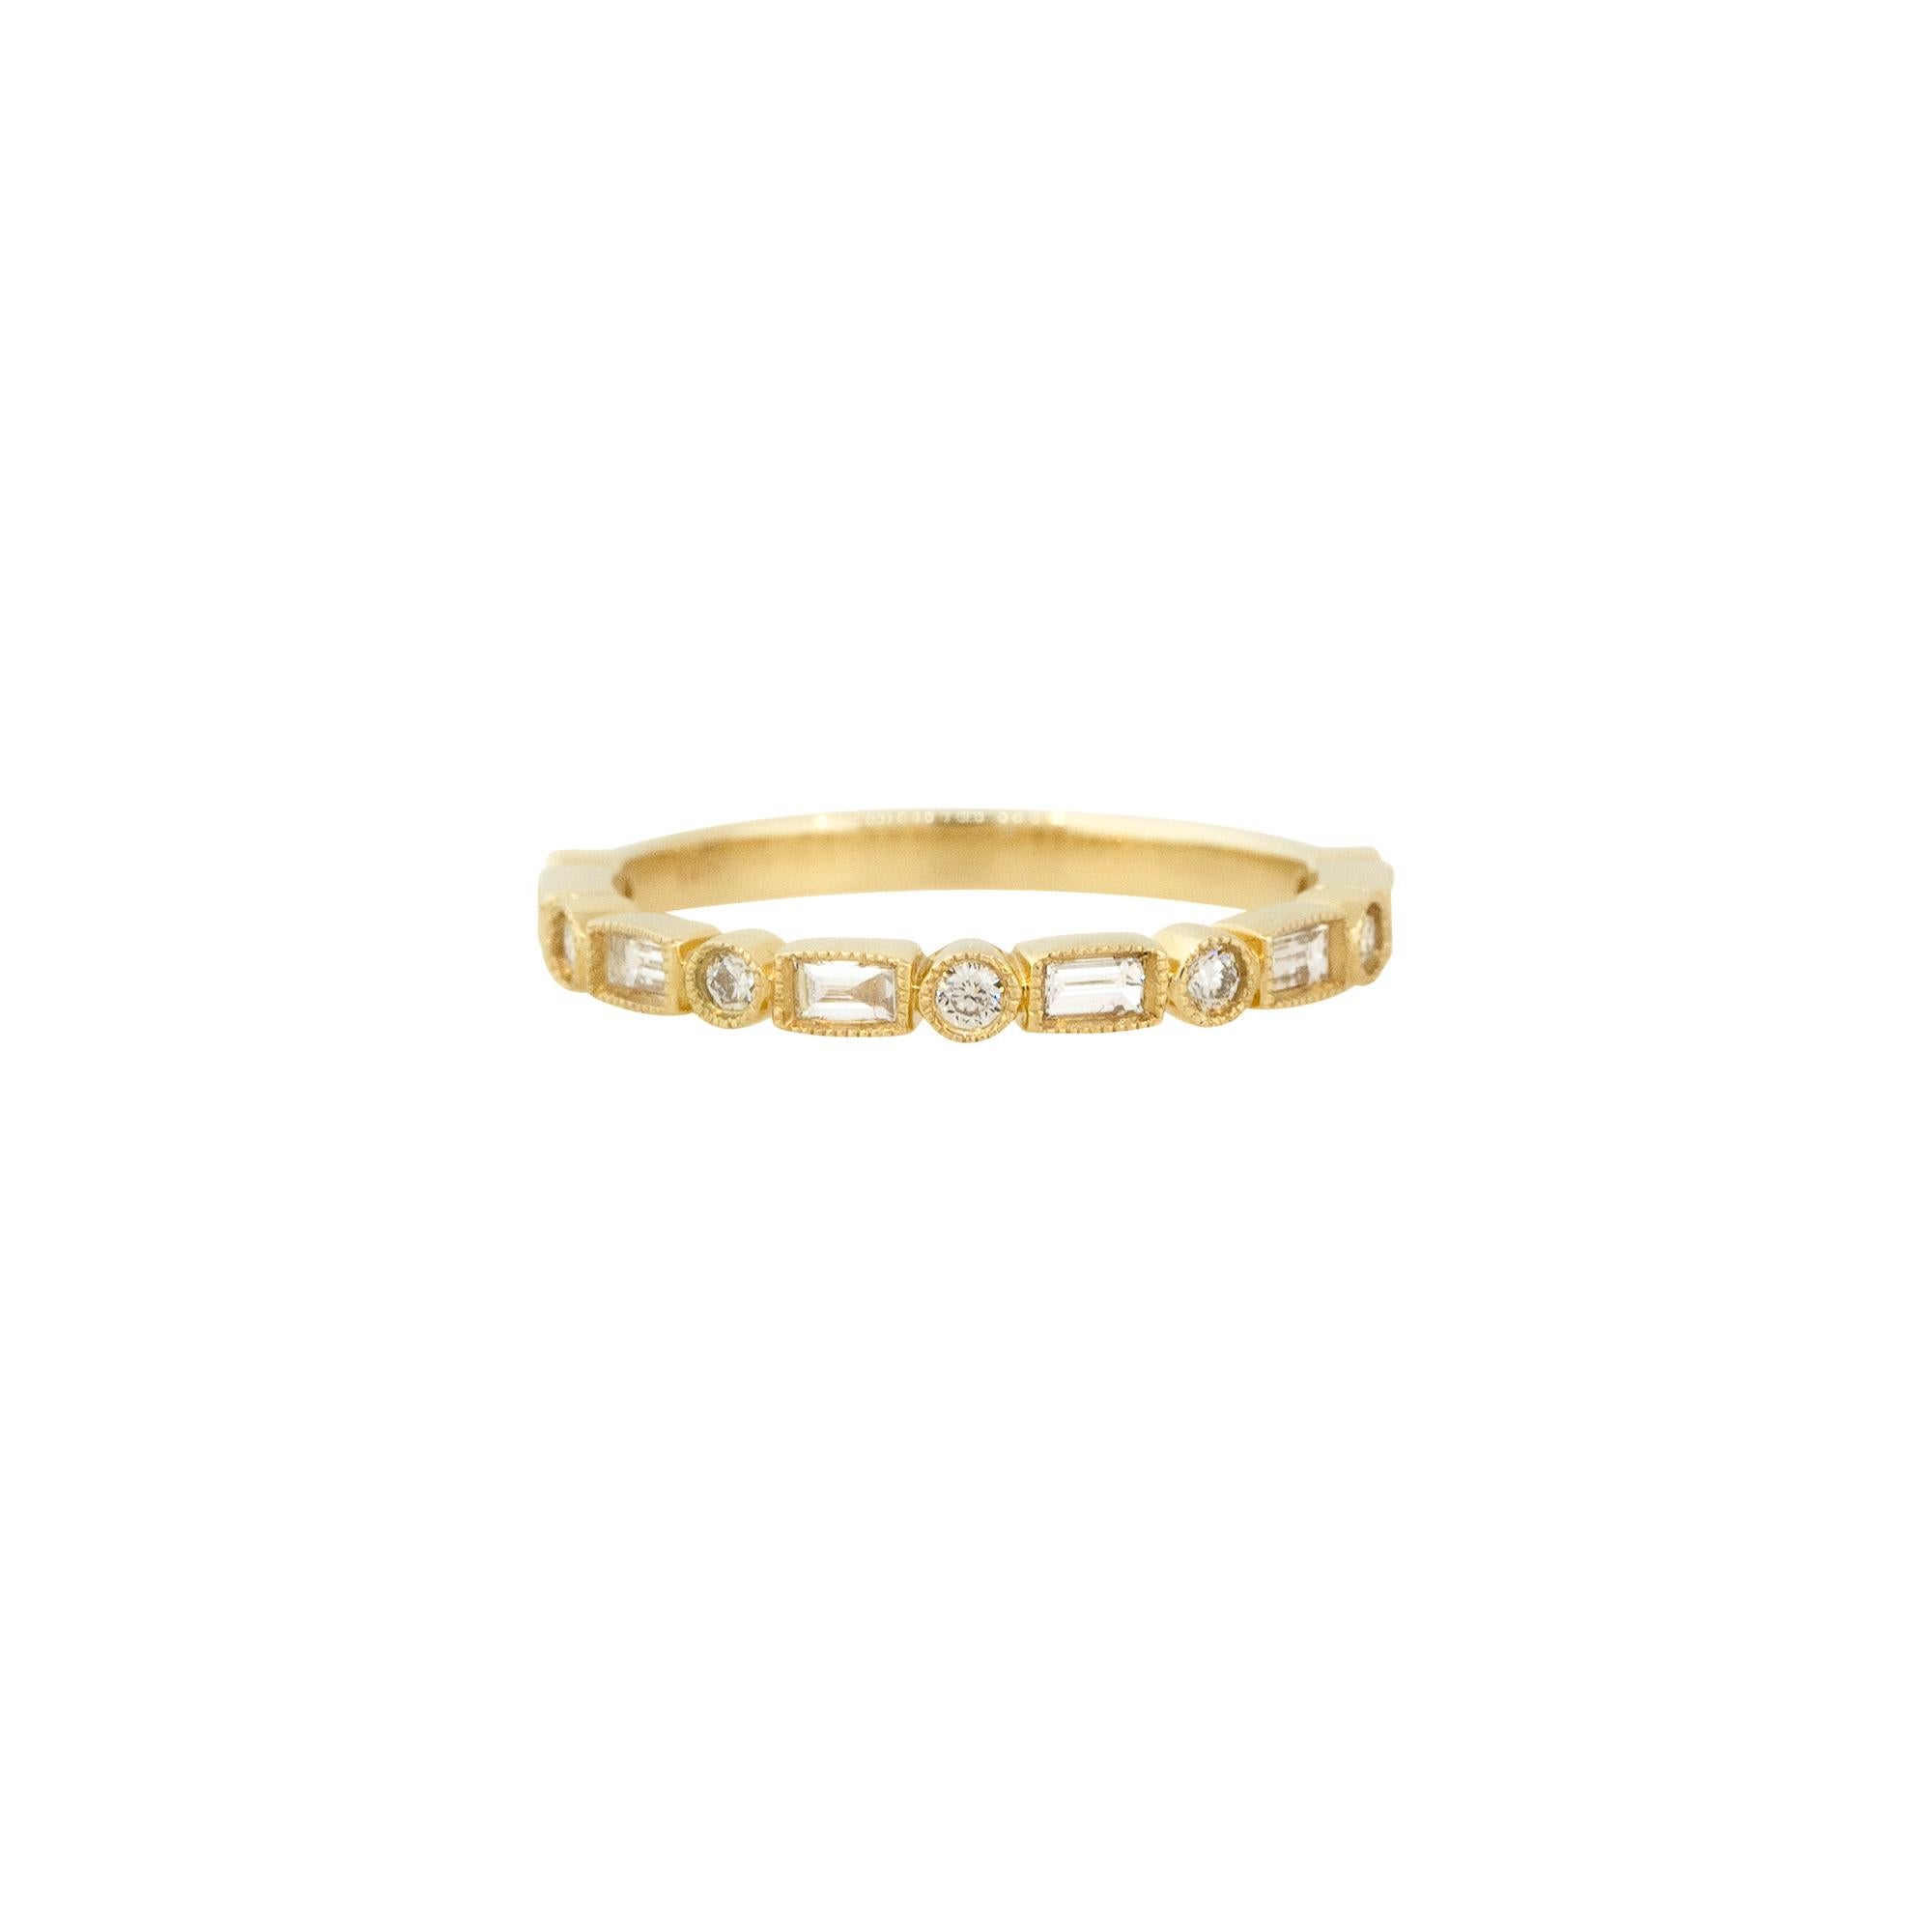 14k Yellow Gold 0.29ctw Baguette and Round Cut Diamond Stackable Ring

Material: 14k Yellow Gold
Diamond Details: Approximately 0.17ctw of Baguette Cut Diamonds. Approximately 0.12ctw of Round Cut Diamonds
Total weight: 1.7g (1.1dwt) 
Size: 5.5 (Can